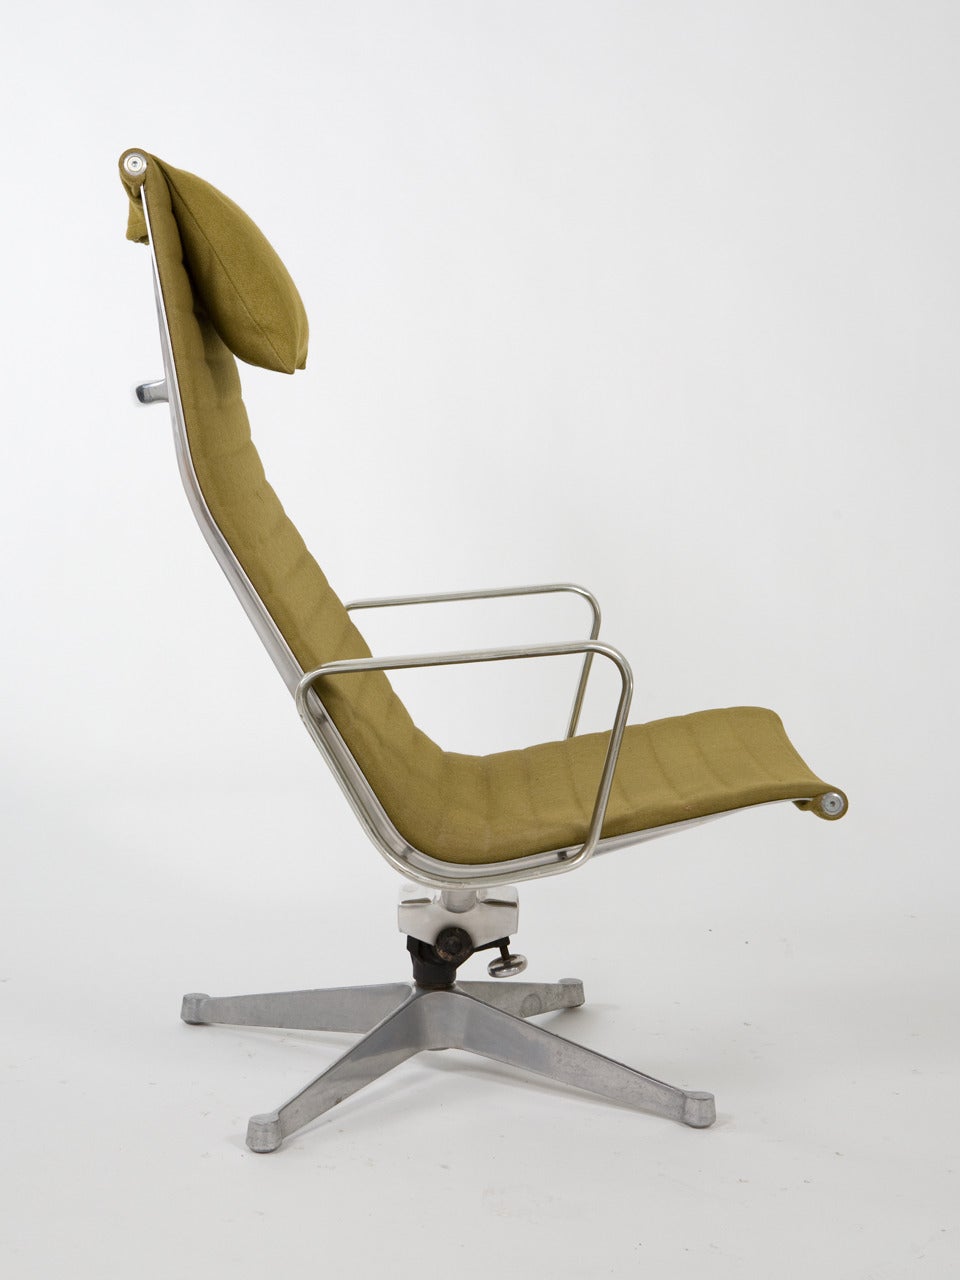 Early production (1960s) Eames Group chair and ottoman with olive upholstery in great original condition.
Arm height 21